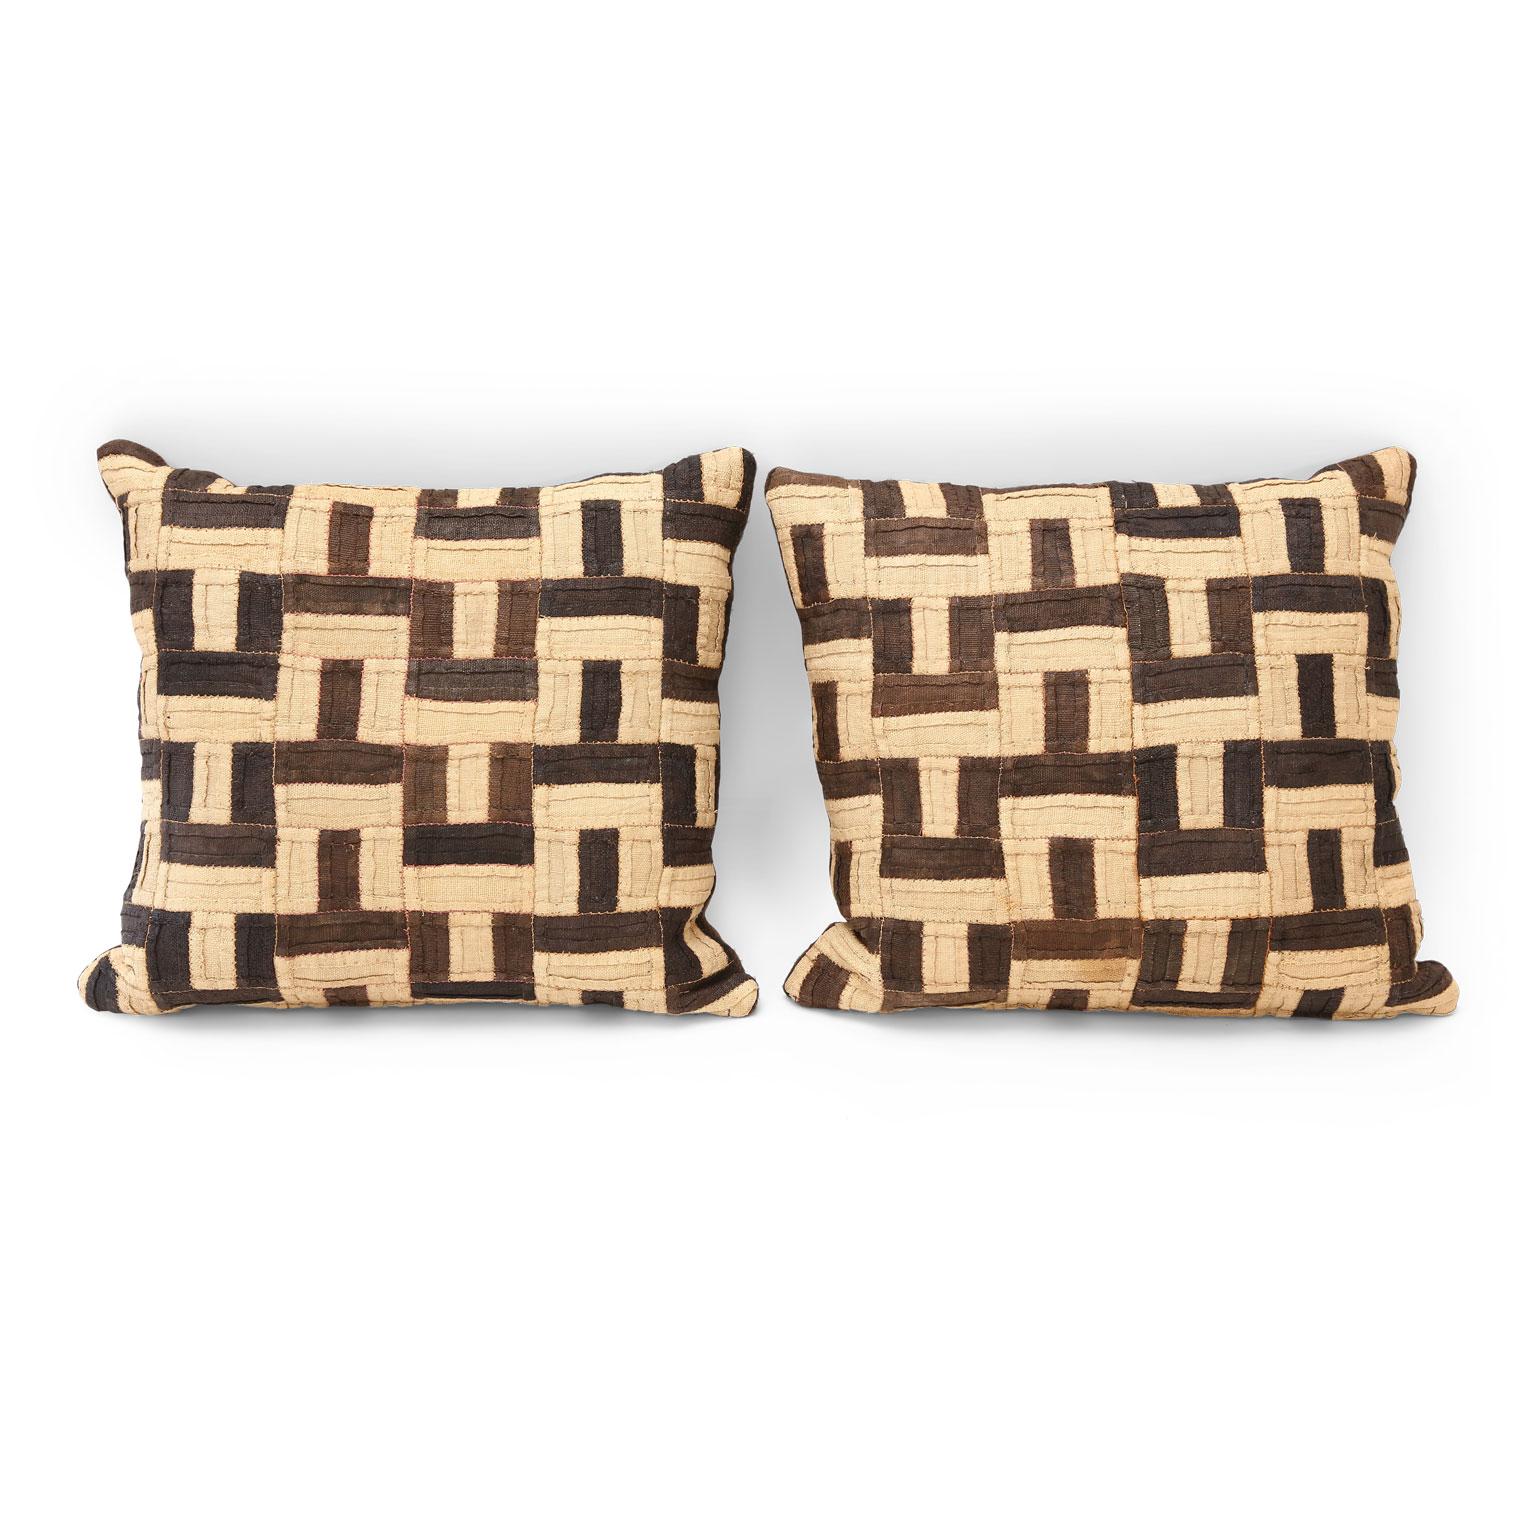 Graphic Kuba cloth cushions, two cushions made from a vintage Kuba cloth dance skirt. The raphia palm fabric is flat-weave and colored by vegetable dye in warm earth tones. Backed with dark brown hand-dyed vintage hemp. Cushions include zip